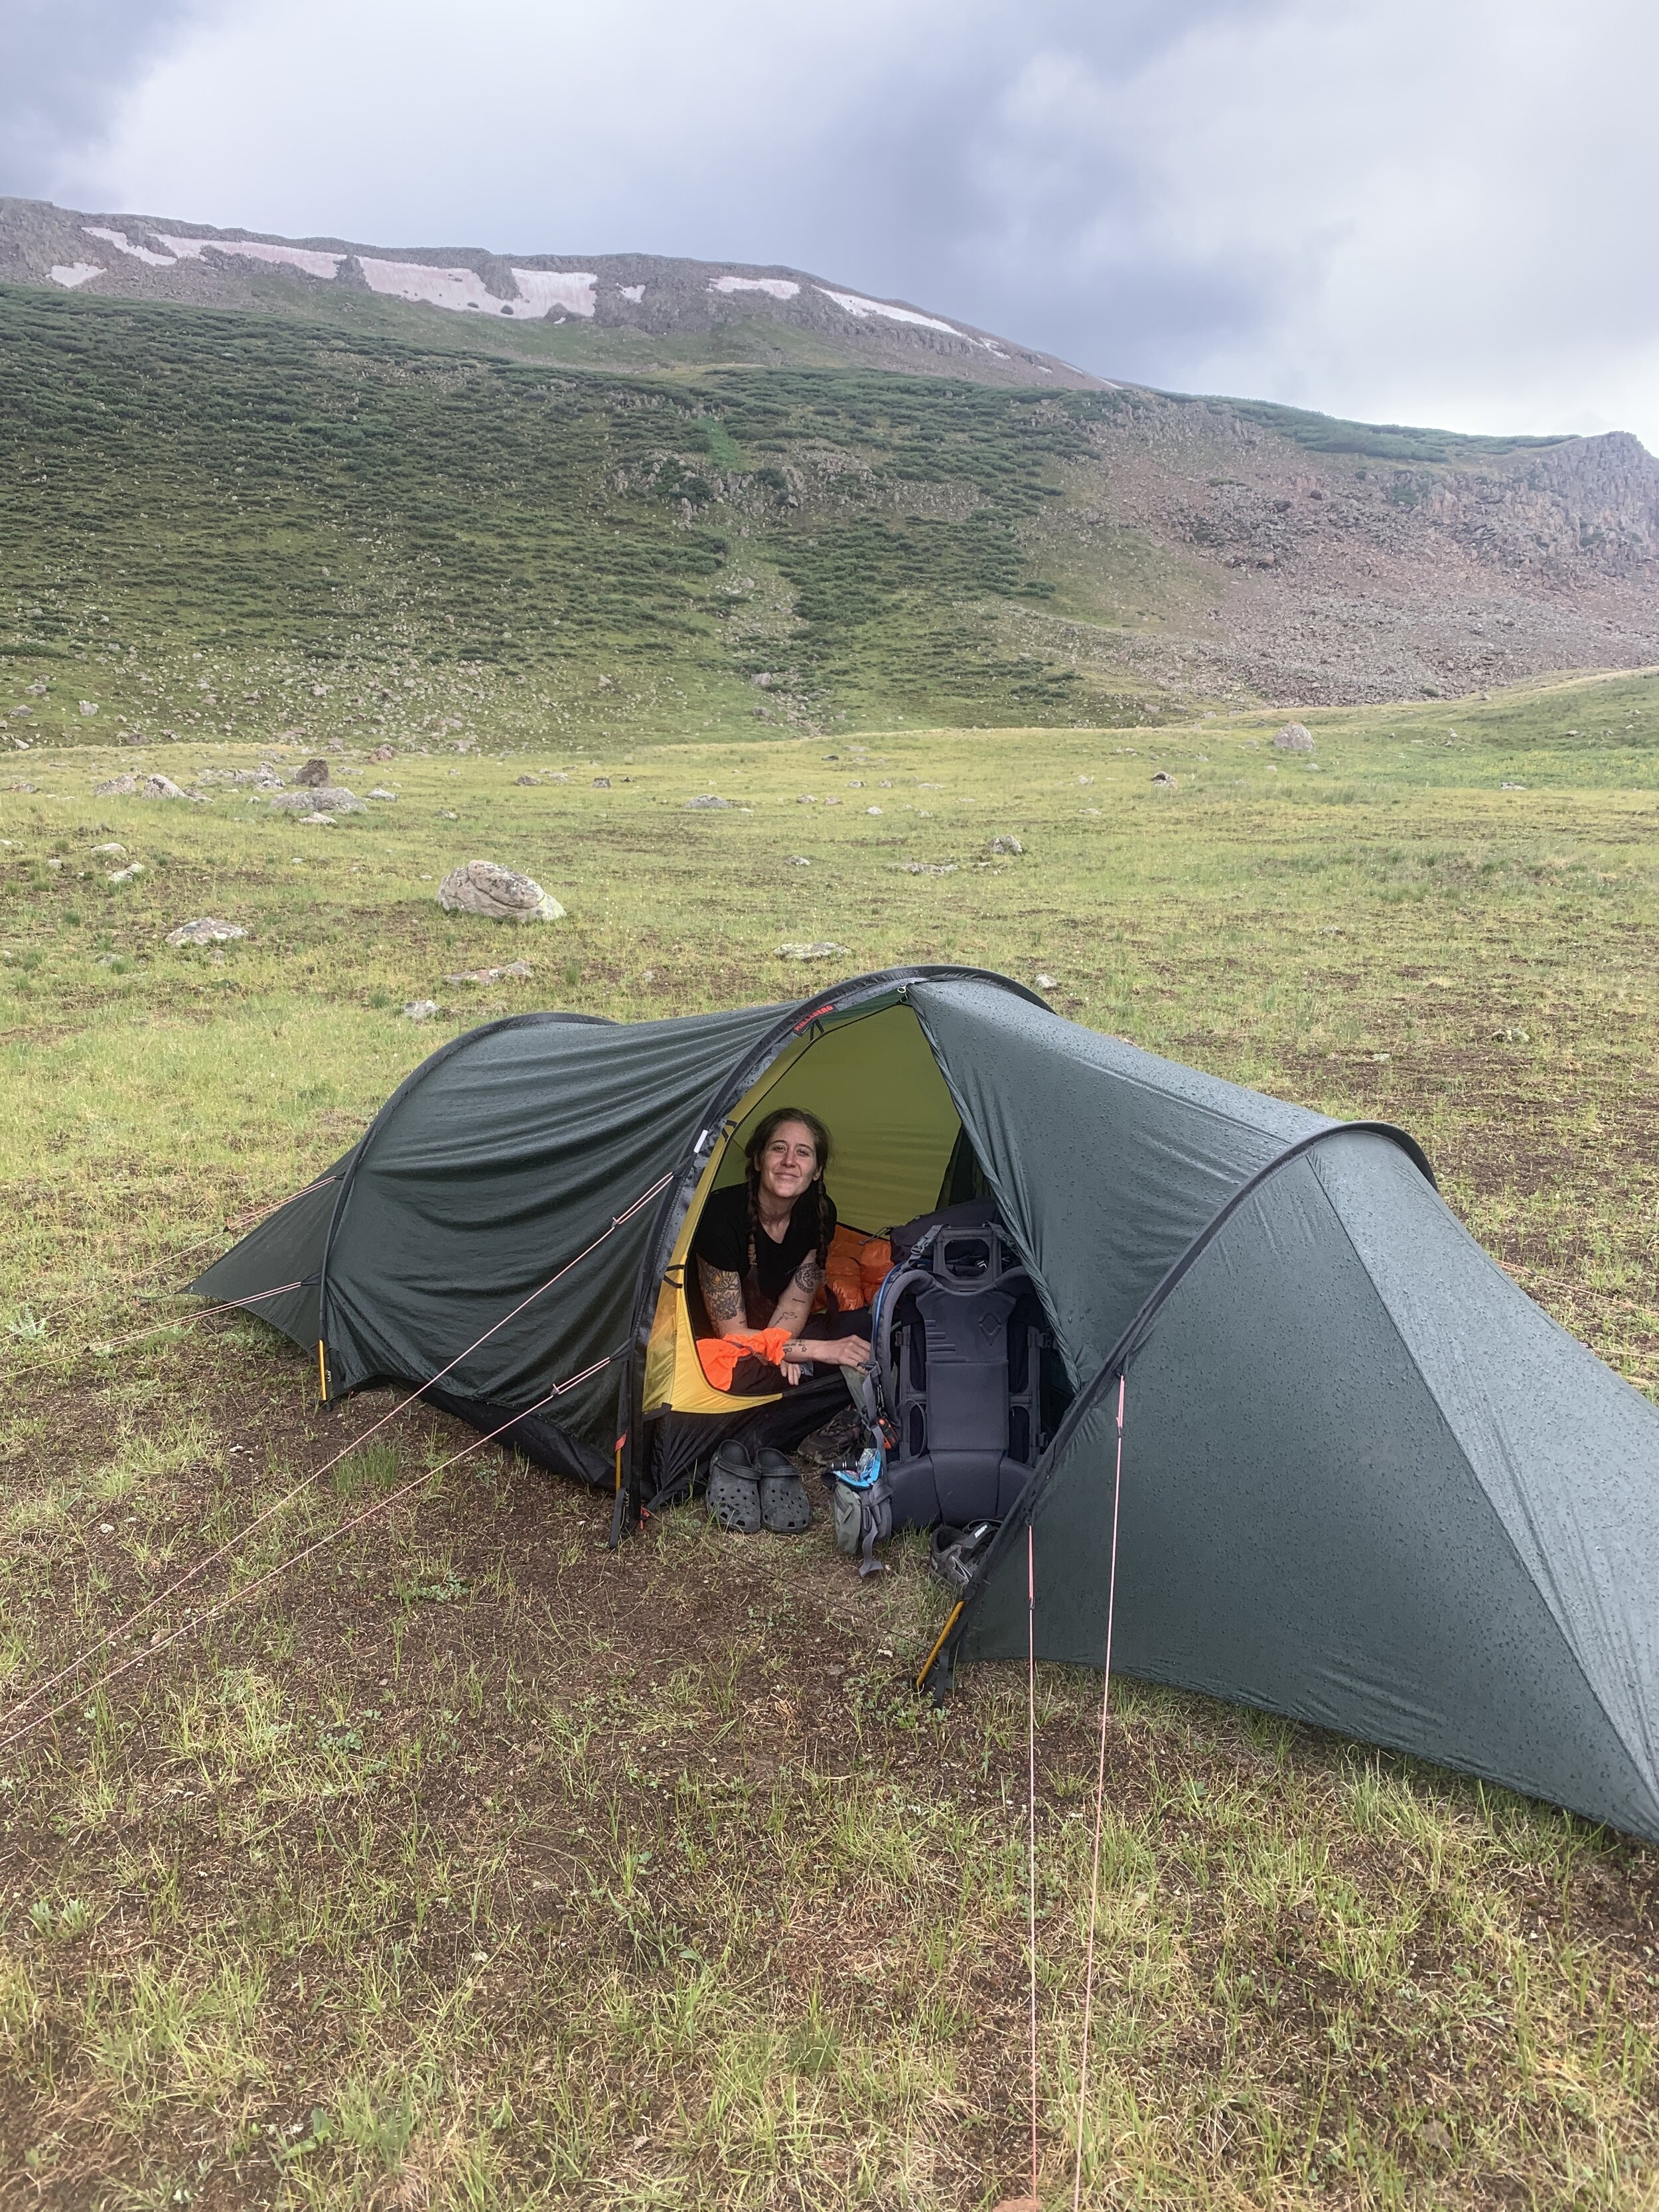 Team Cold Case testing out the West Slope Case while staying dry in the tent. It's an essential item for your backcountry hunting gear list.